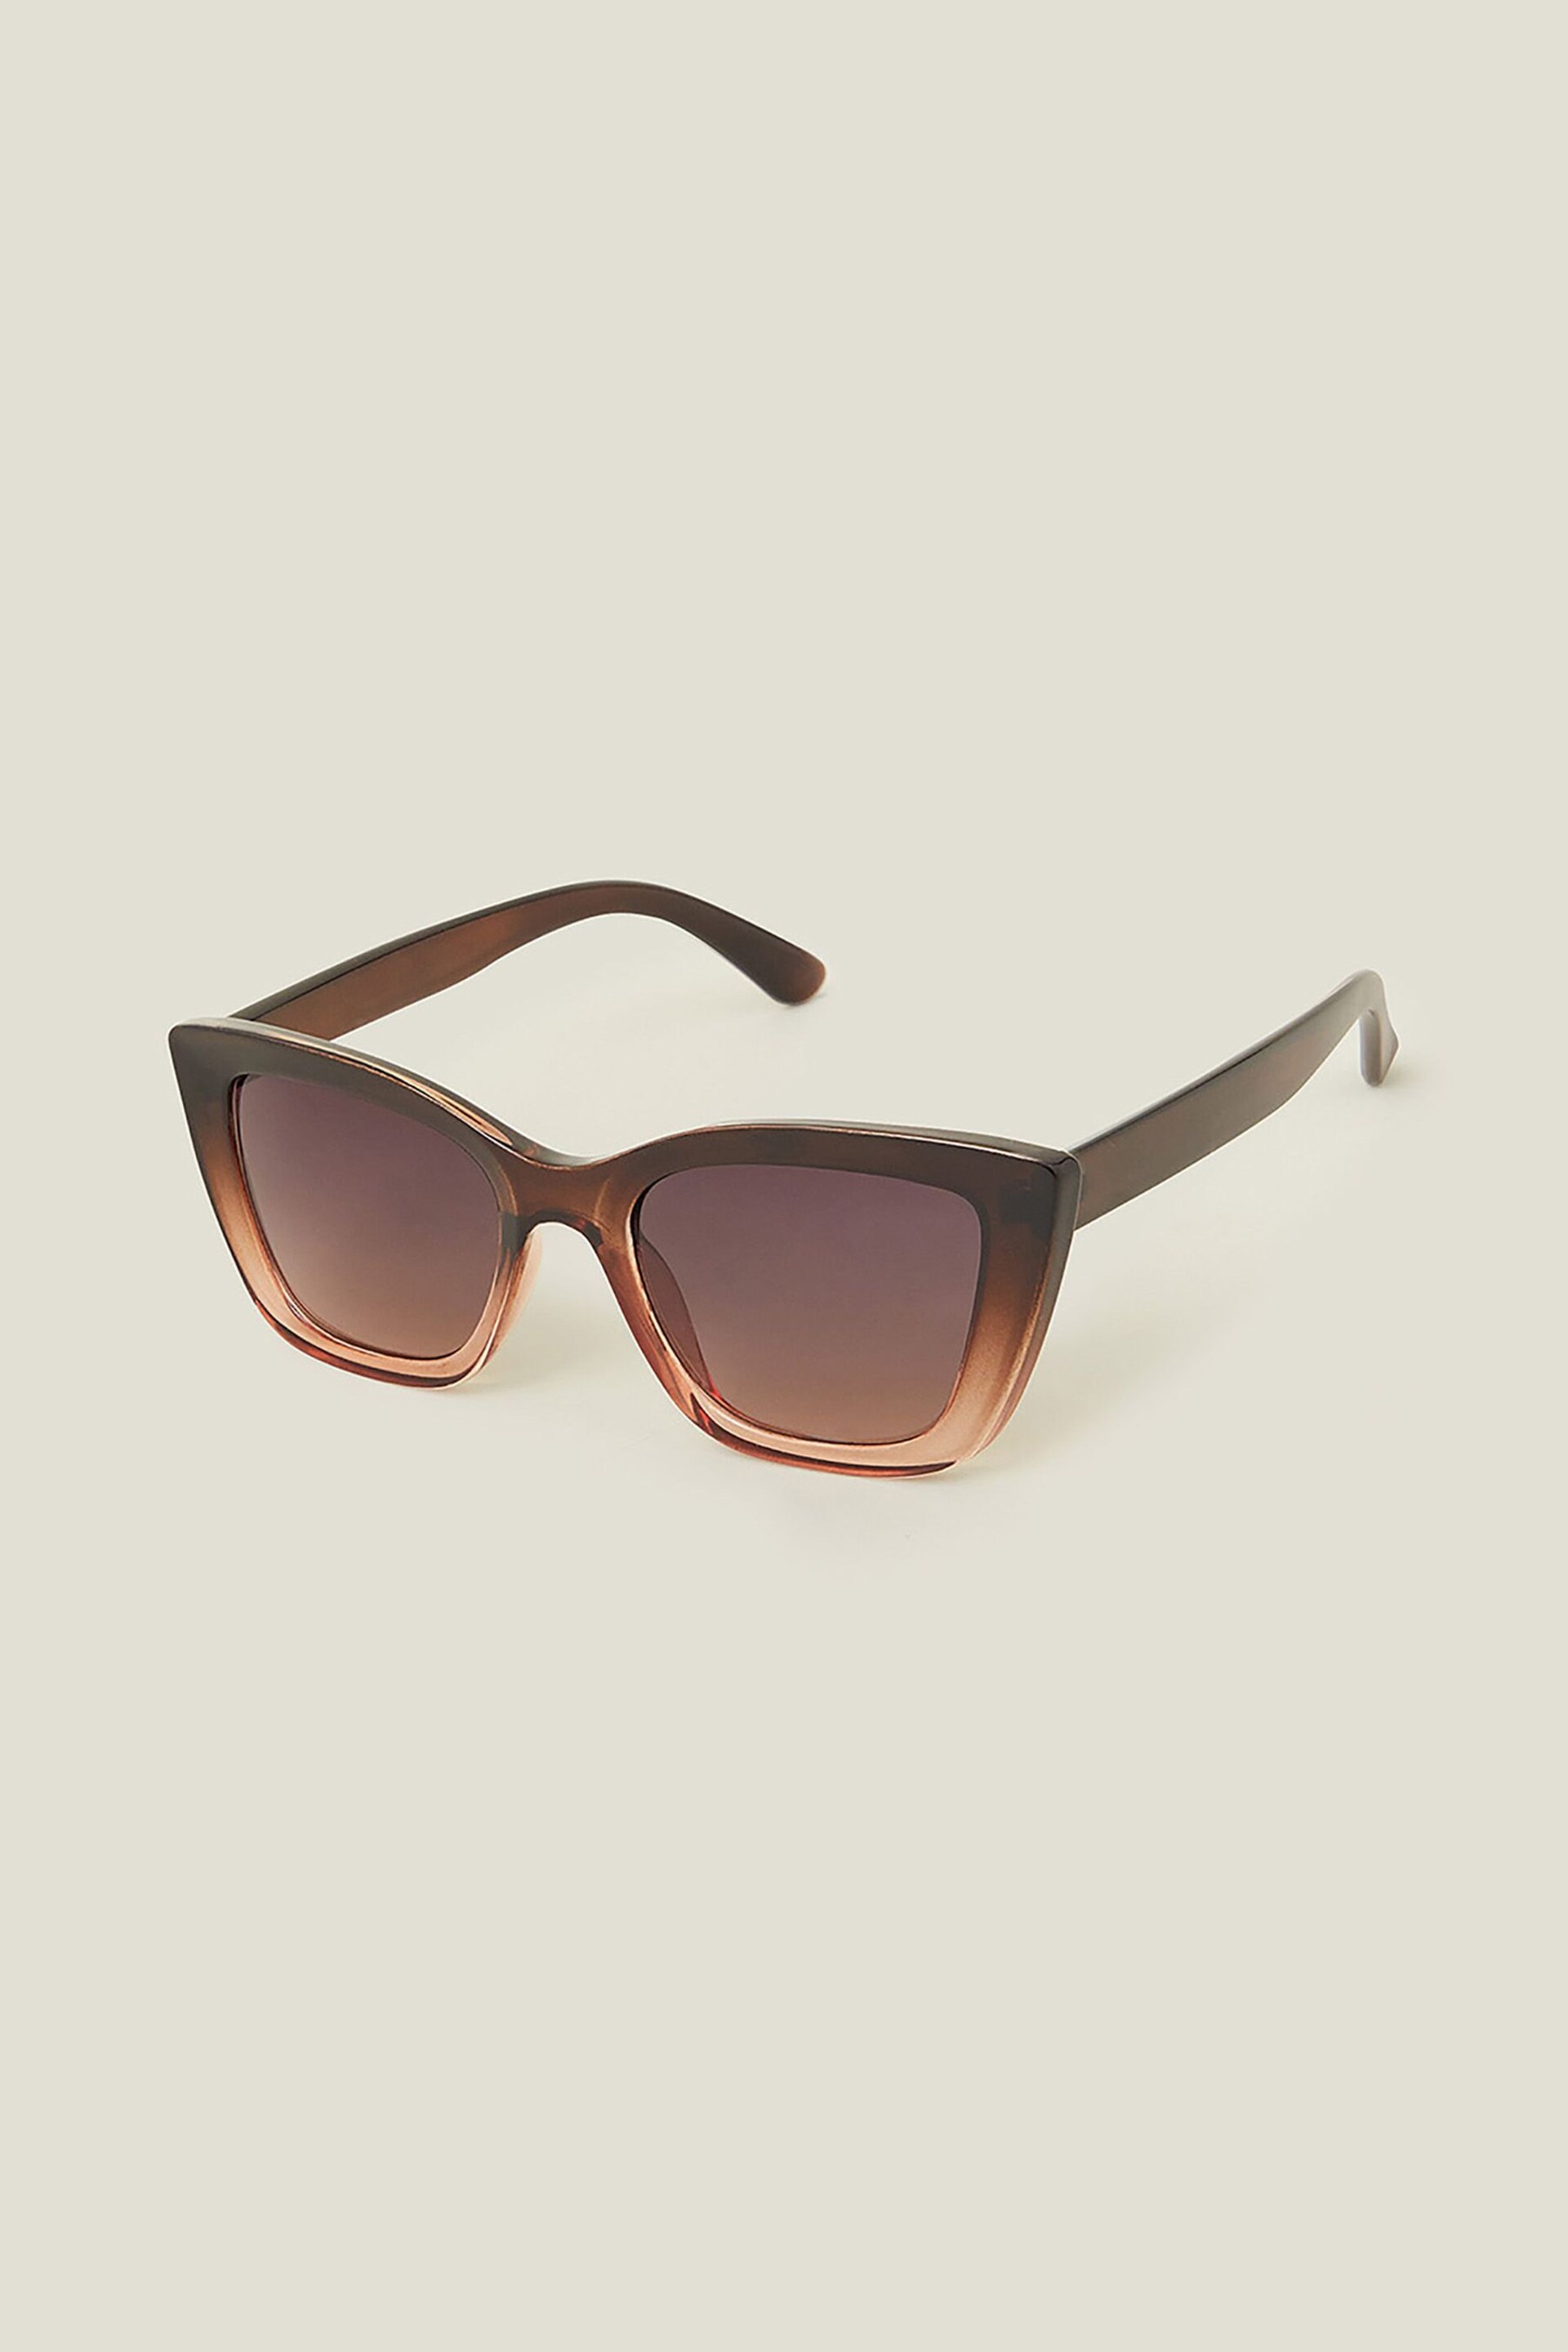 Accessorize Brown Ombre Crystal Cateye Sunglasses - Image 1 of 3